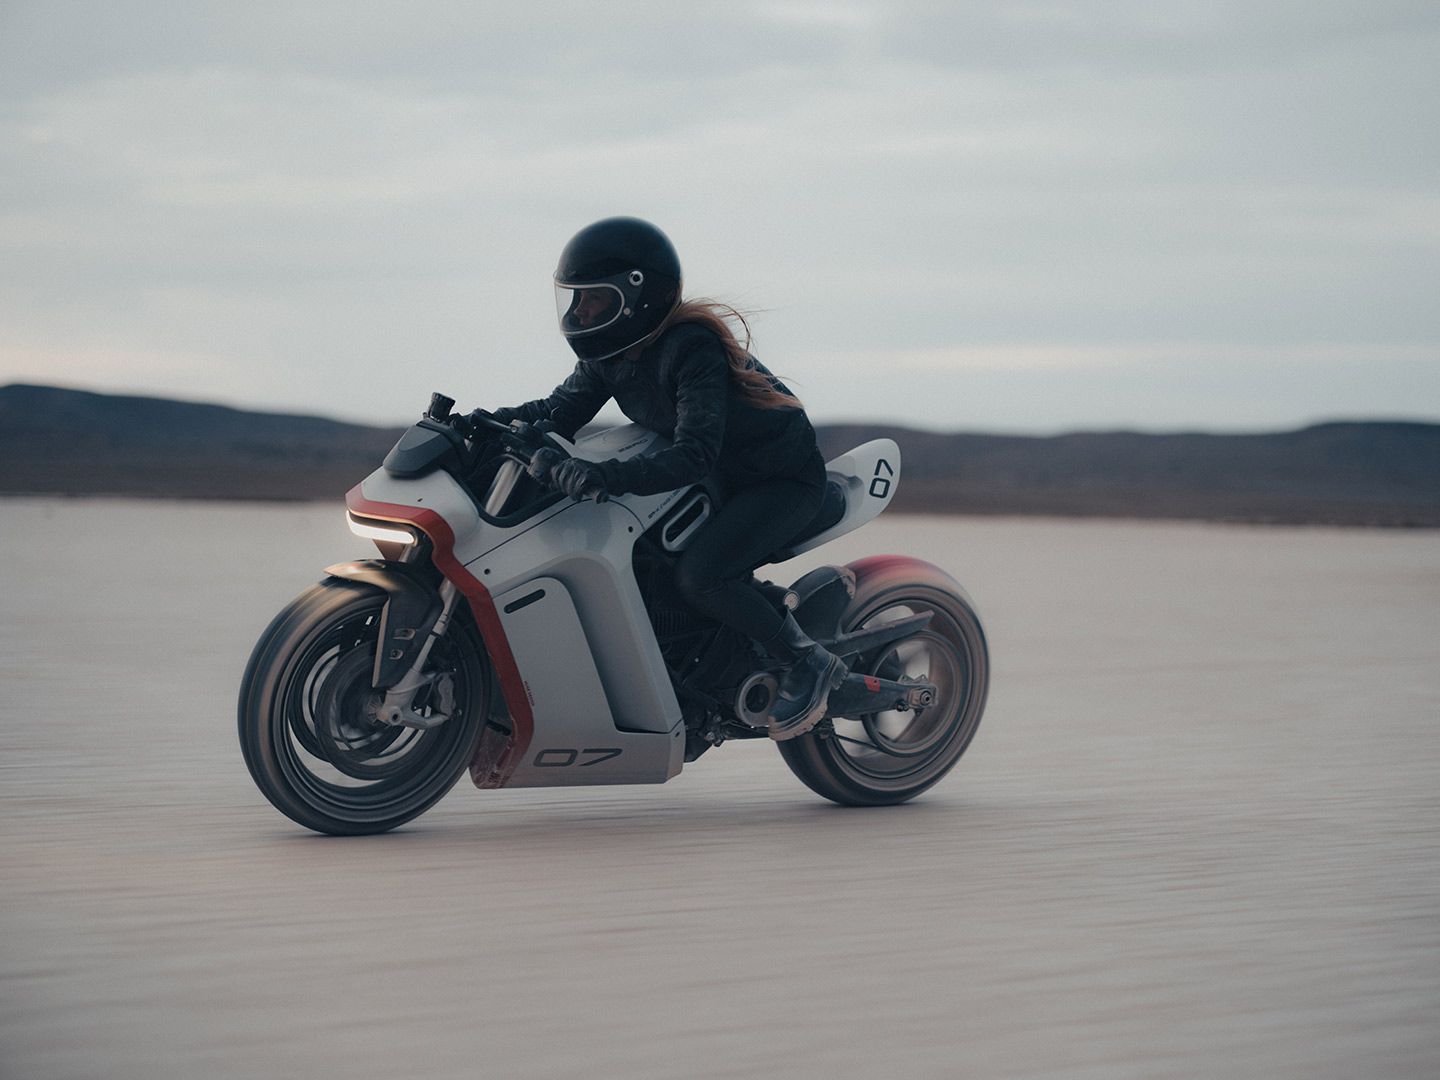 Could be the dry lake bed scenery or it could be the bike, but this photo of the Zero SR-X gives off awesome sci-fi vibes.